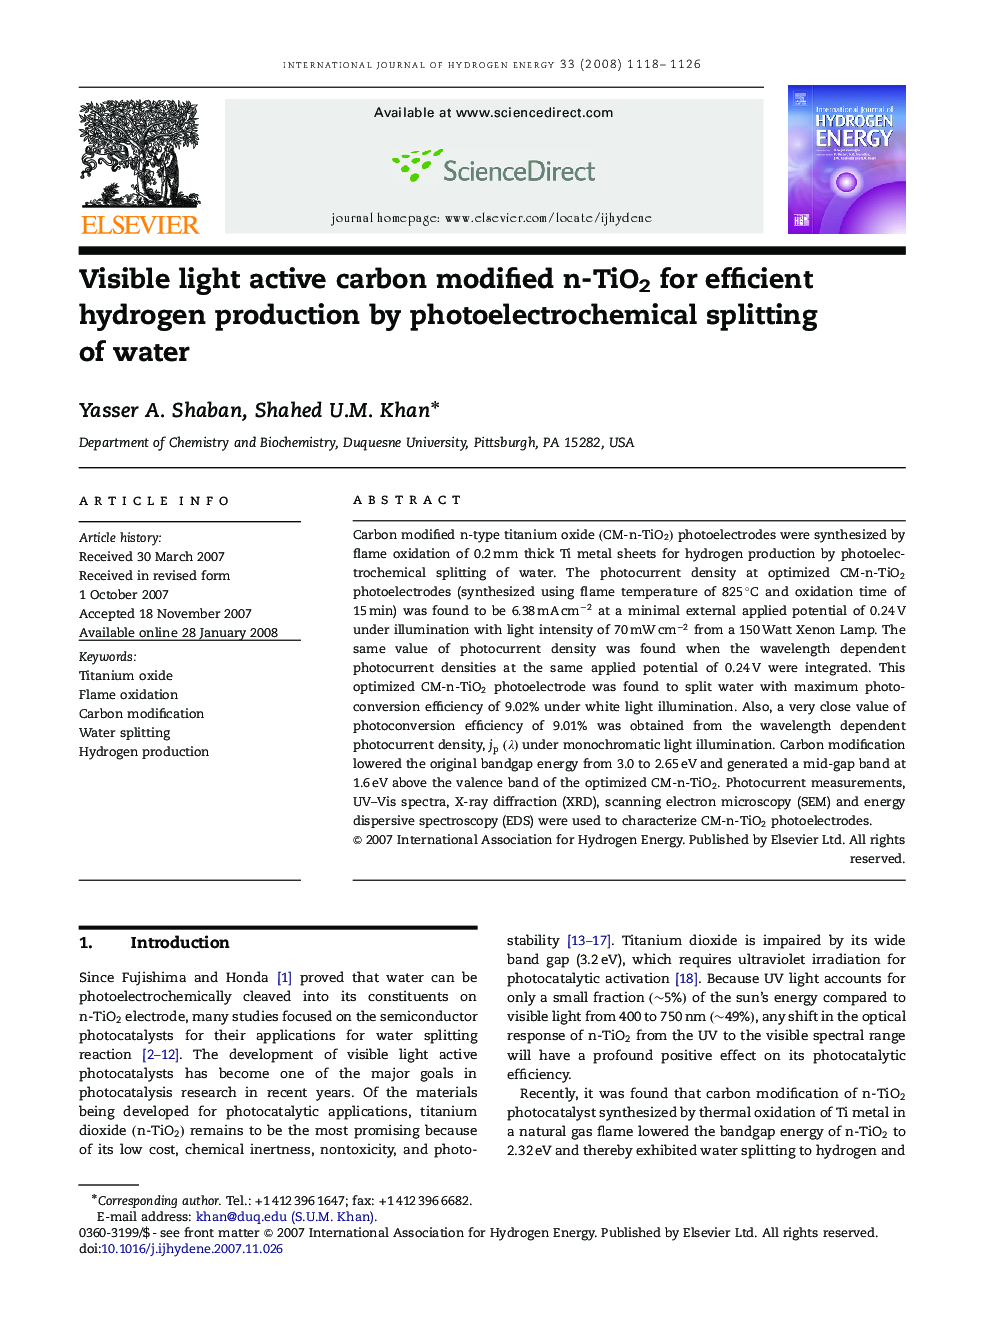 Visible light active carbon modified n-TiO2 for efficient hydrogen production by photoelectrochemical splitting of water